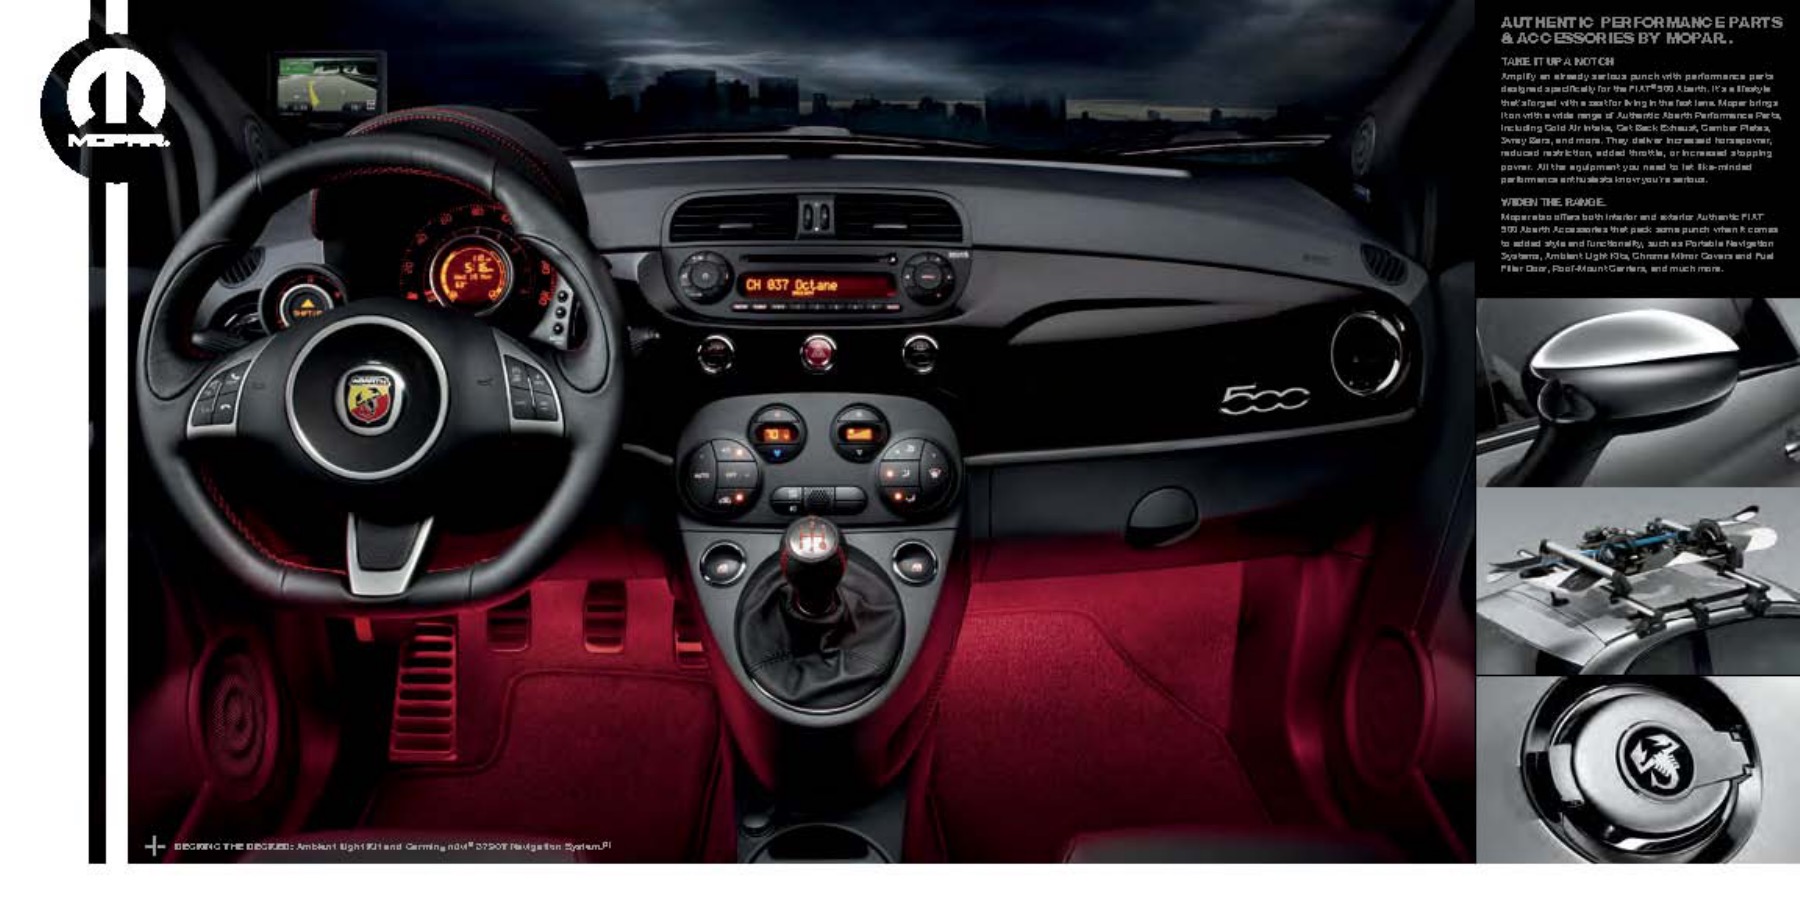 2012 Fiat 500 Abarth Brochure Page 22